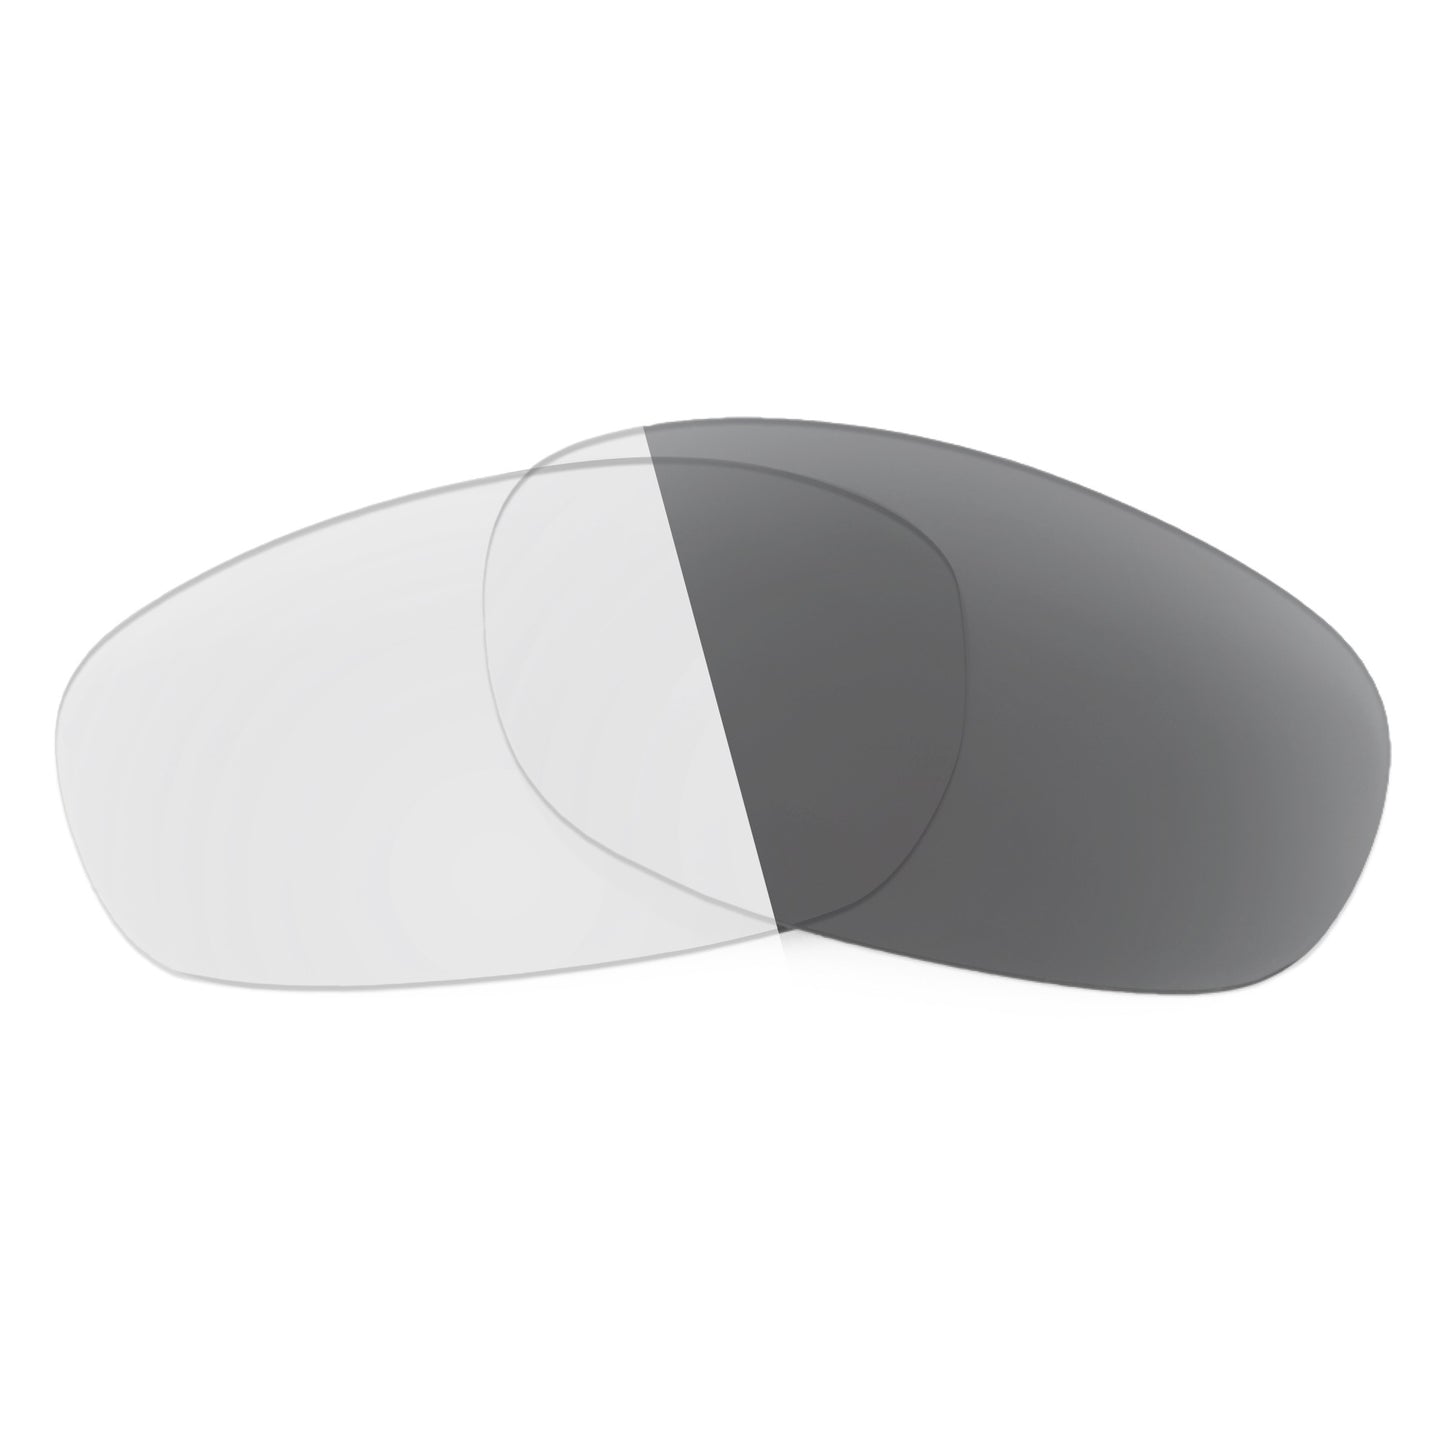 Revant replacement lenses for Spy Optic Tackle Non-Polarized Adapt Gray Photochromic